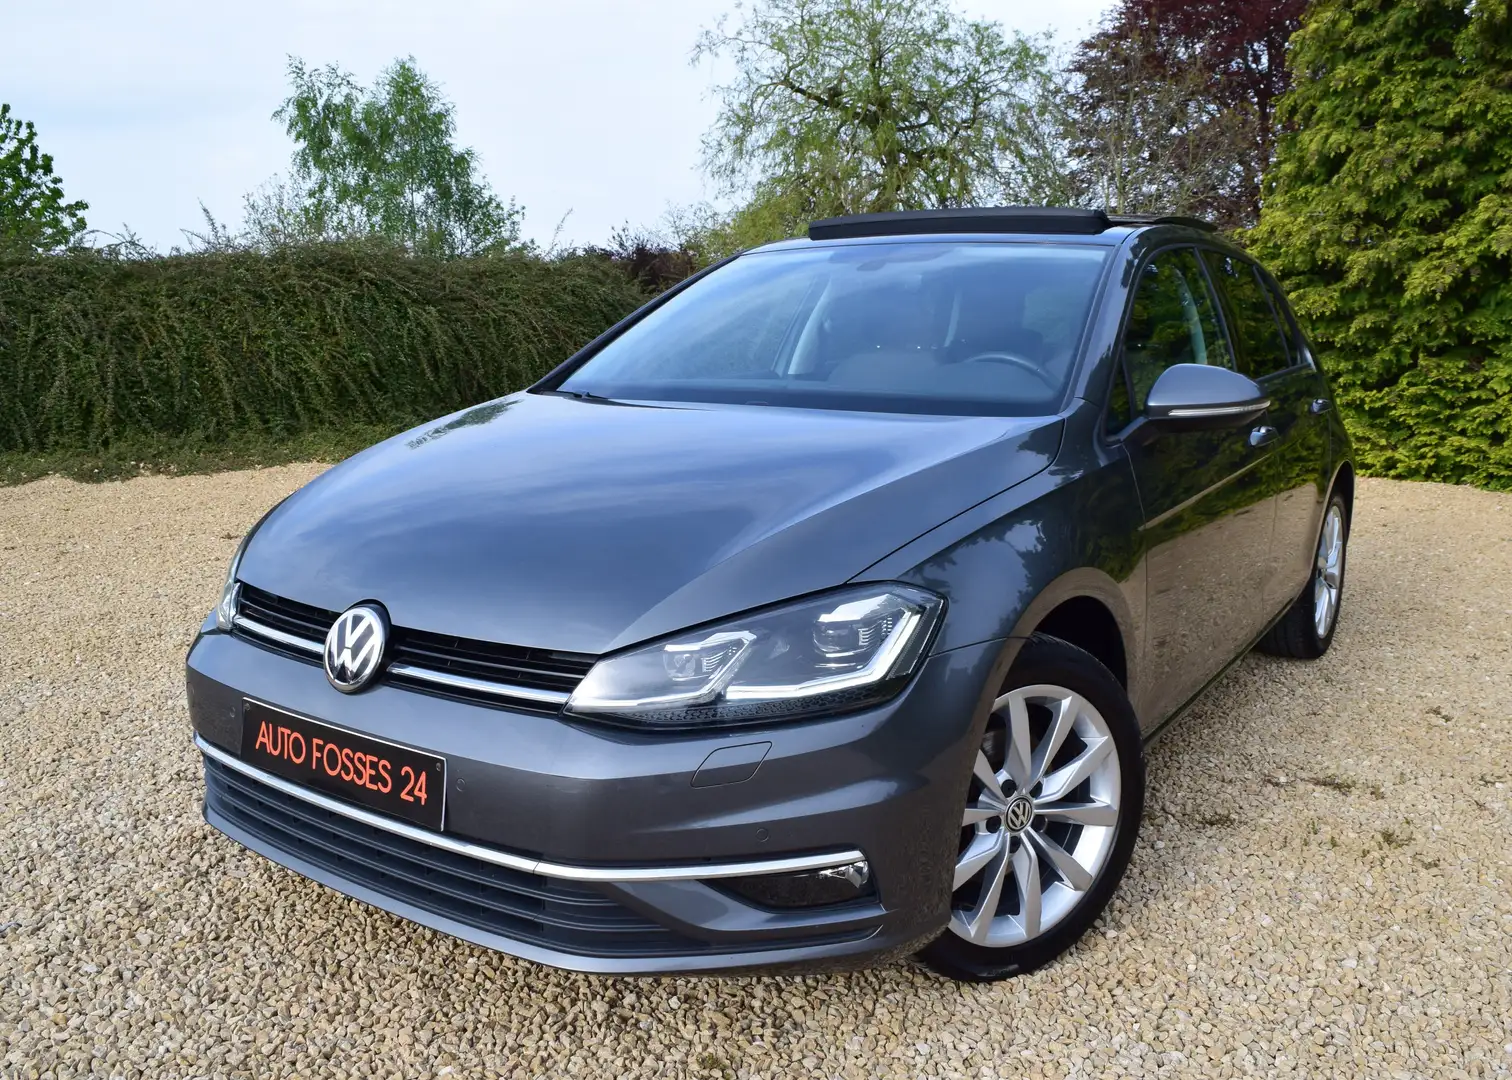 Volkswagen Golf 1.6 CR TDI 115 CV PACK SPORT PANORAMIQUE XENON LED Gris - 1